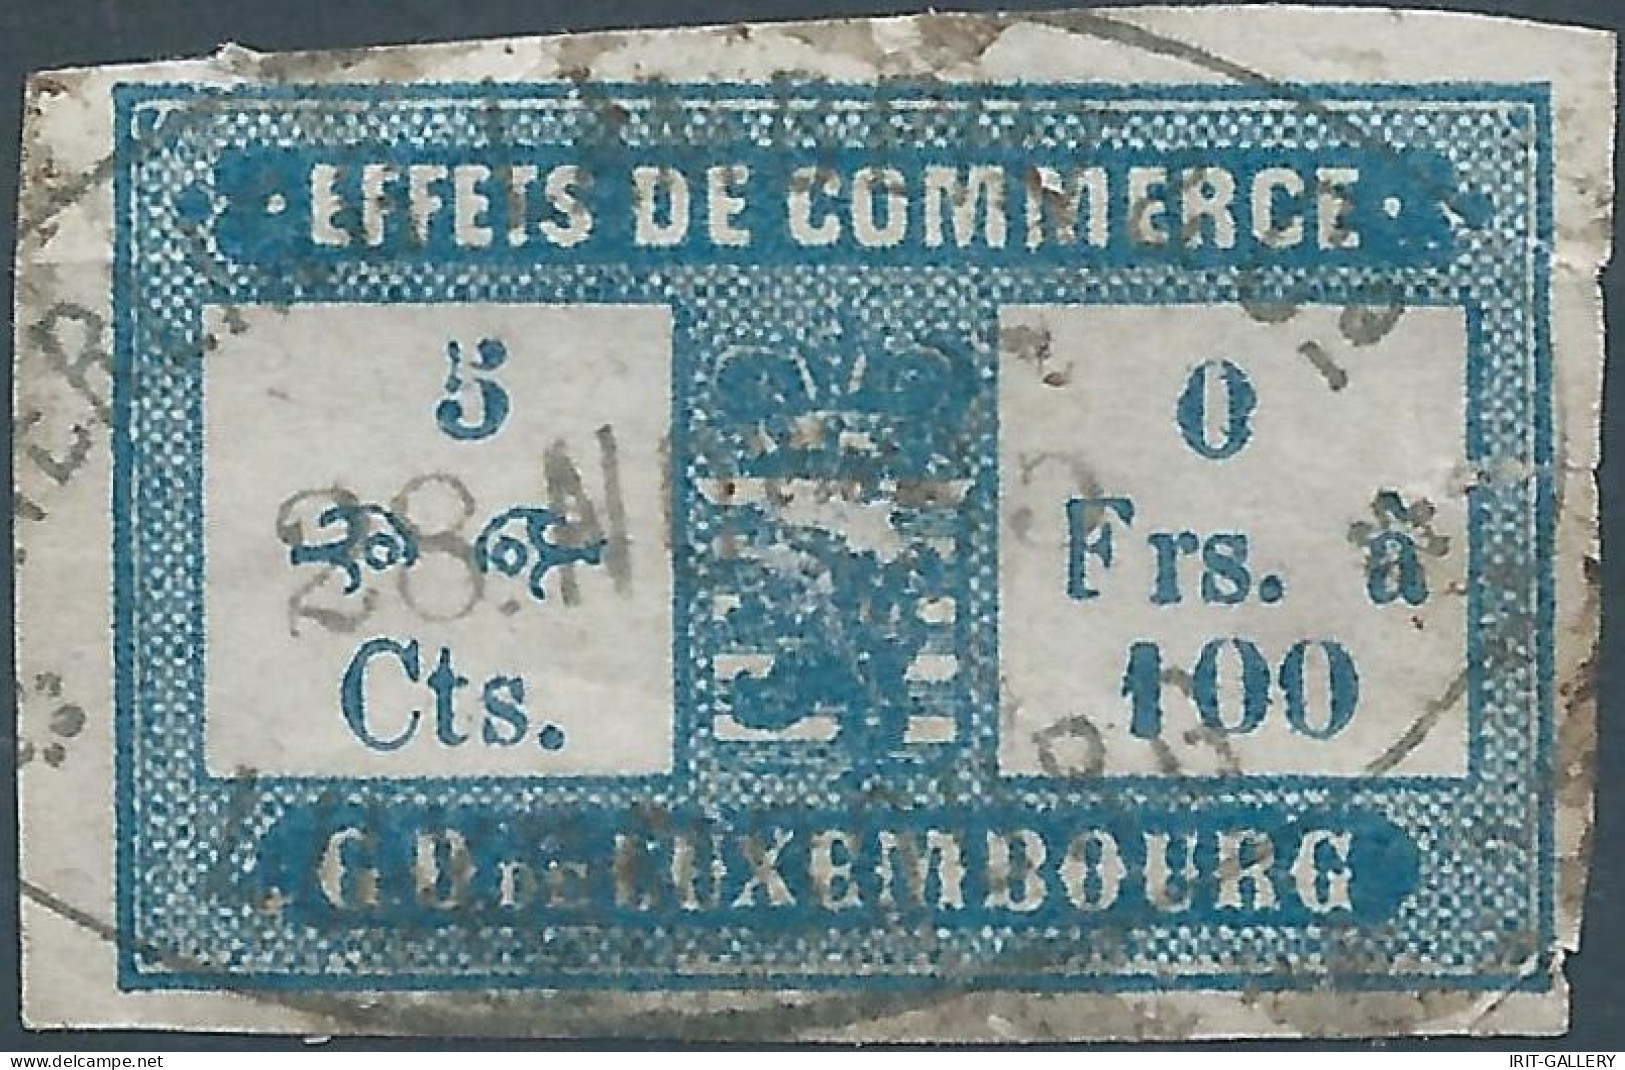 Lussemburgo - G.D De LUXEMBOURG,1885 Revenue Stamp Tax Fiscal , EFFETS DE COMMERCE-TRADING EFFECTS , Very Old - Fiscaux